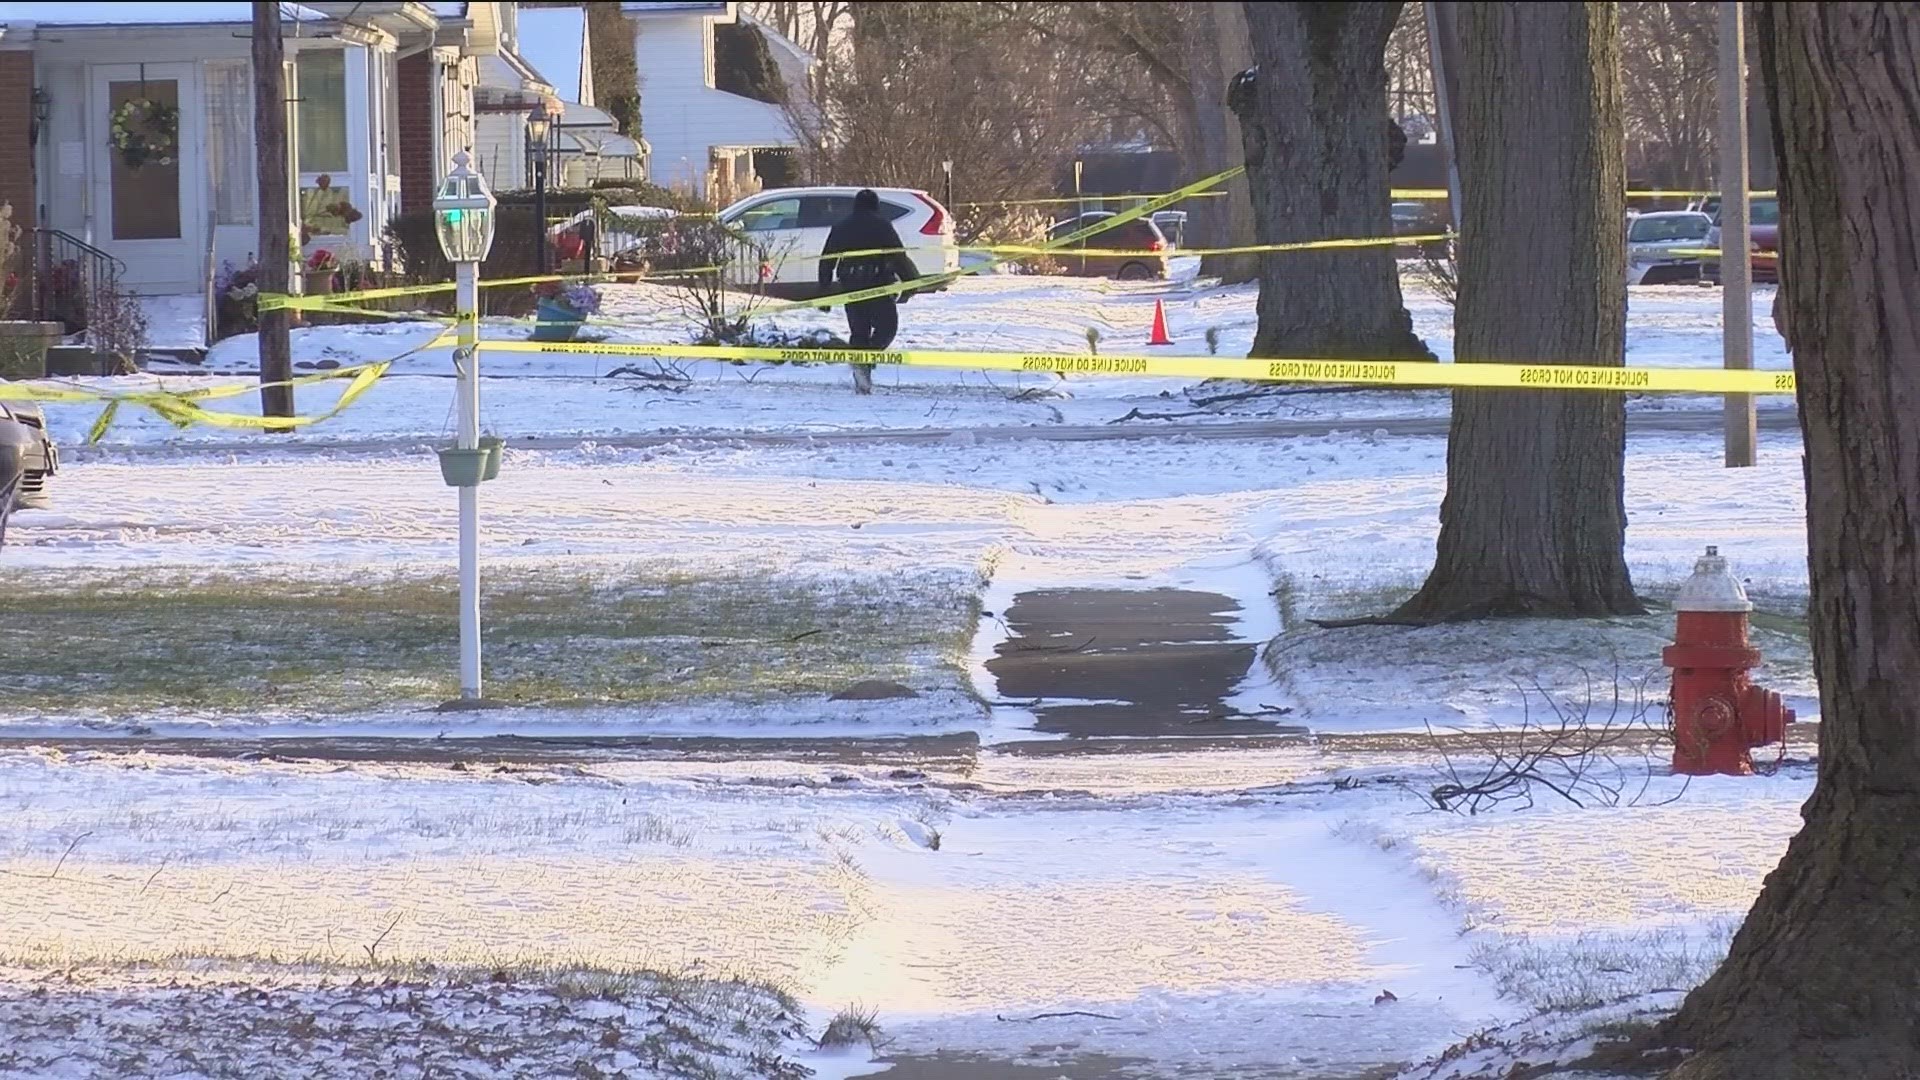 Residents on Avondale Avenue described the sounds of gunfire and aftermath of the shooting that killed a man accused of strangling his girlfriend Sunday.